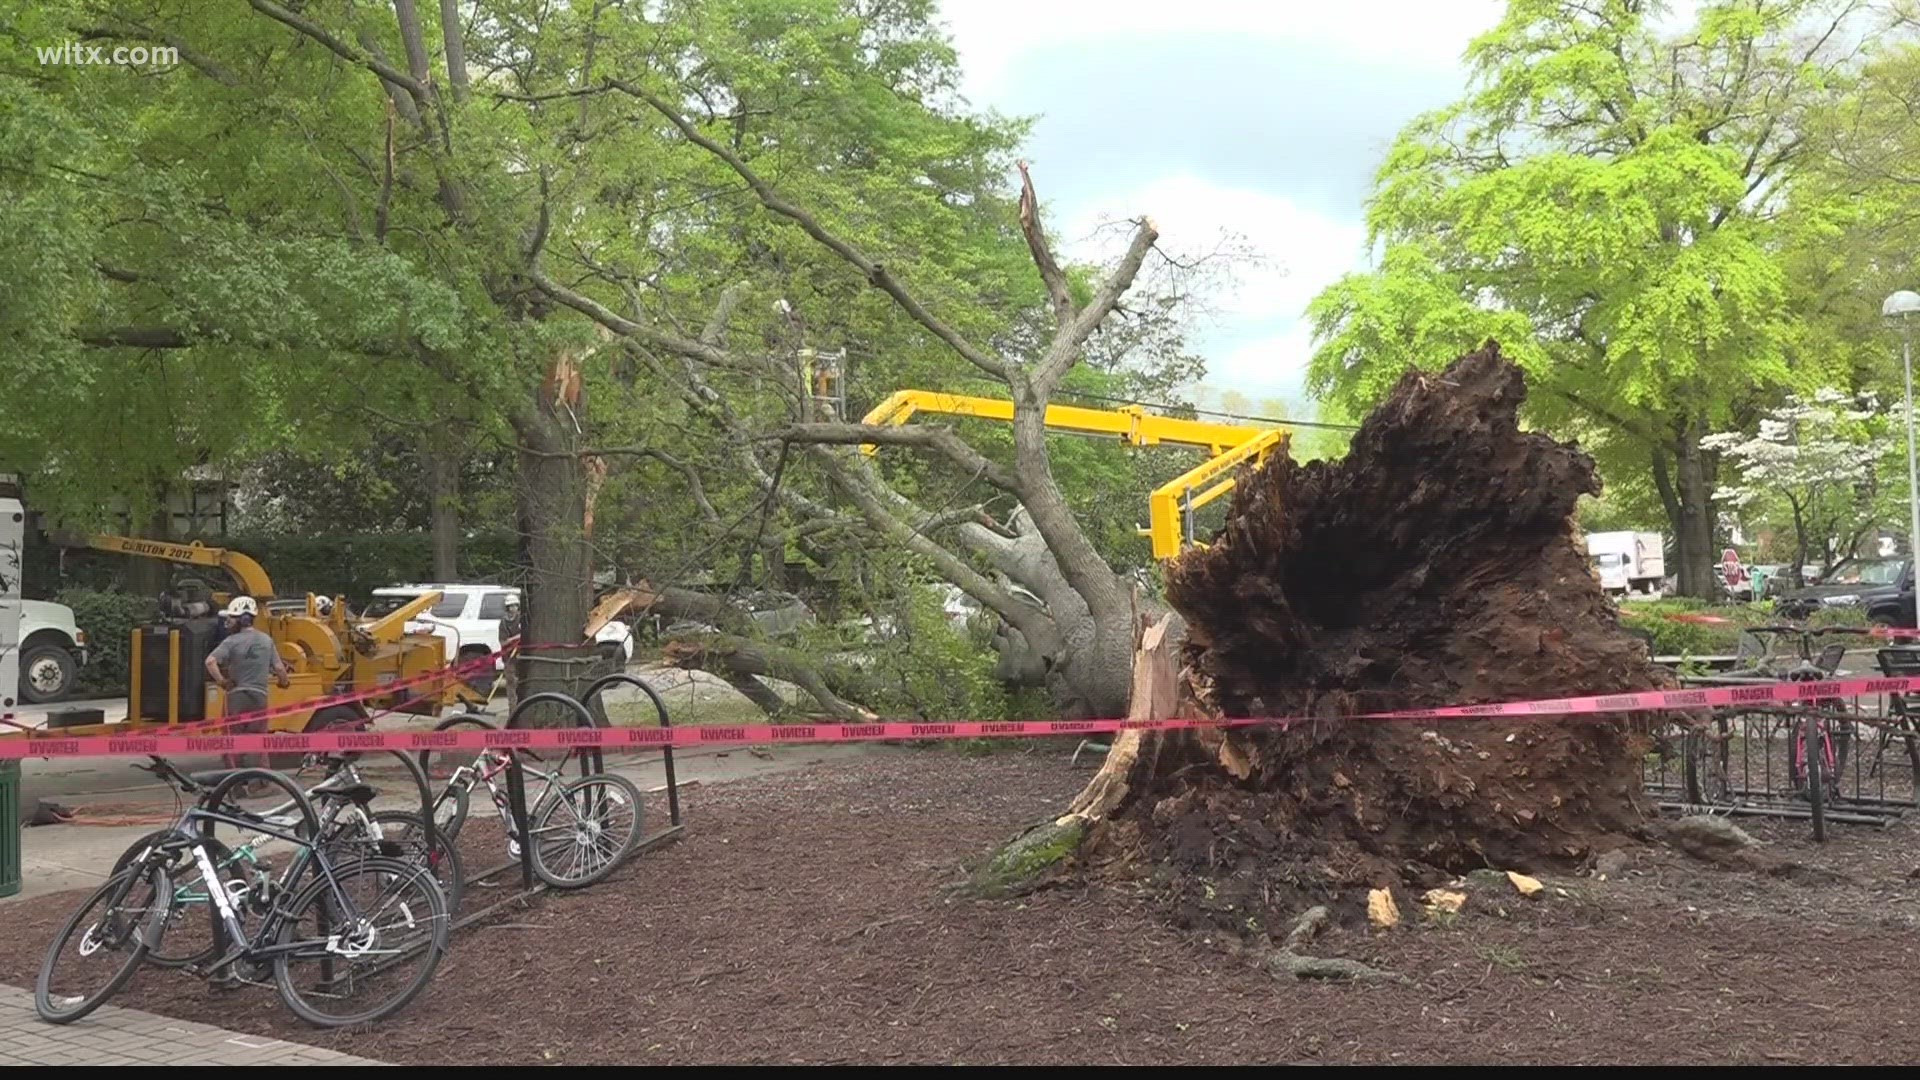 Tuesday evening's storm in the Midlands caused some limbs and trees to fall.